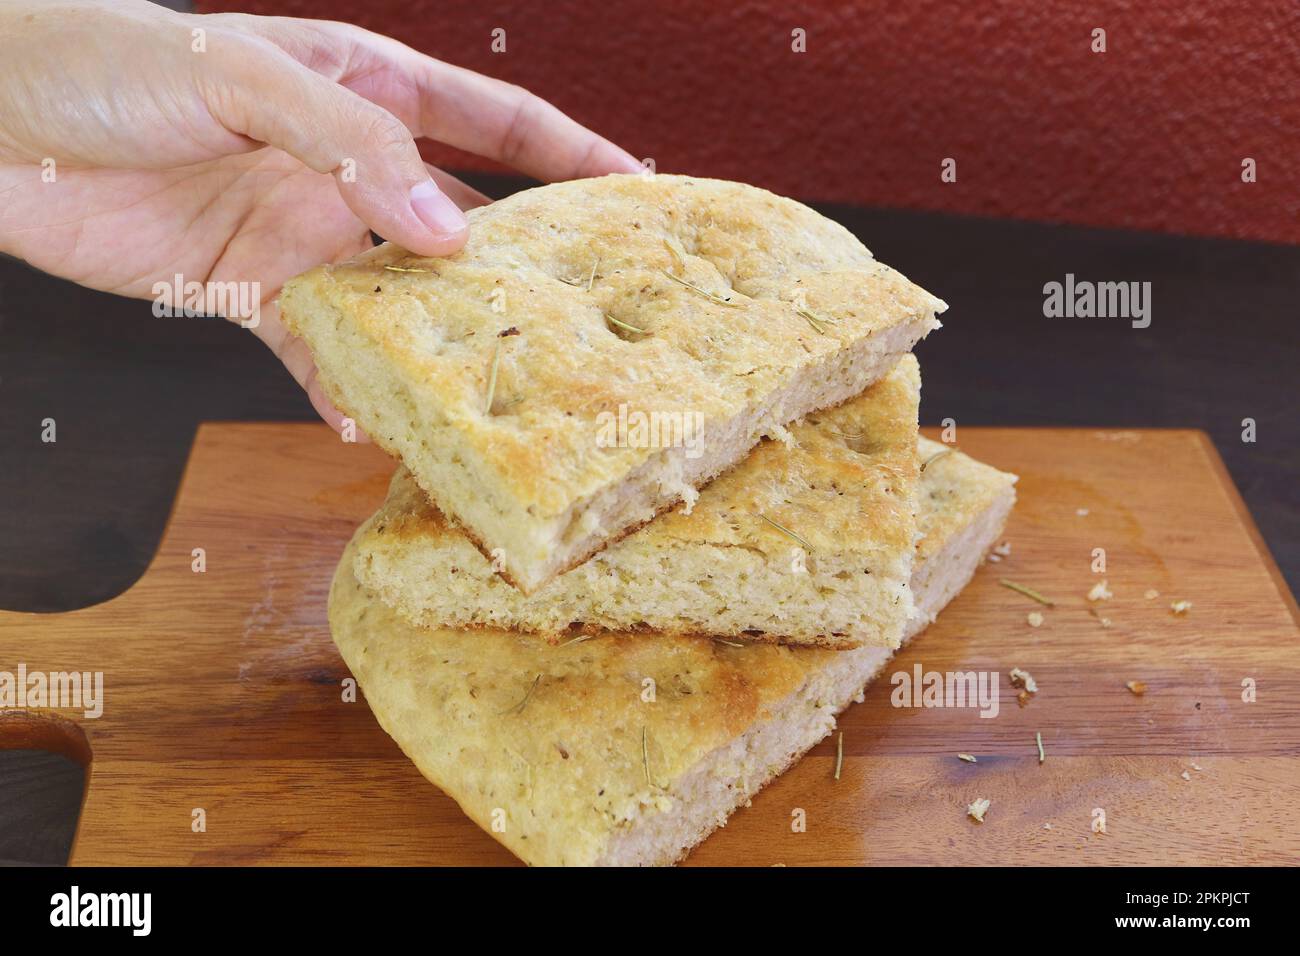 Closeup Hand Picking a Slice of Tasty Rosemary Focaccia Bread Piled Up on Wooden Breadboard Stock Photo